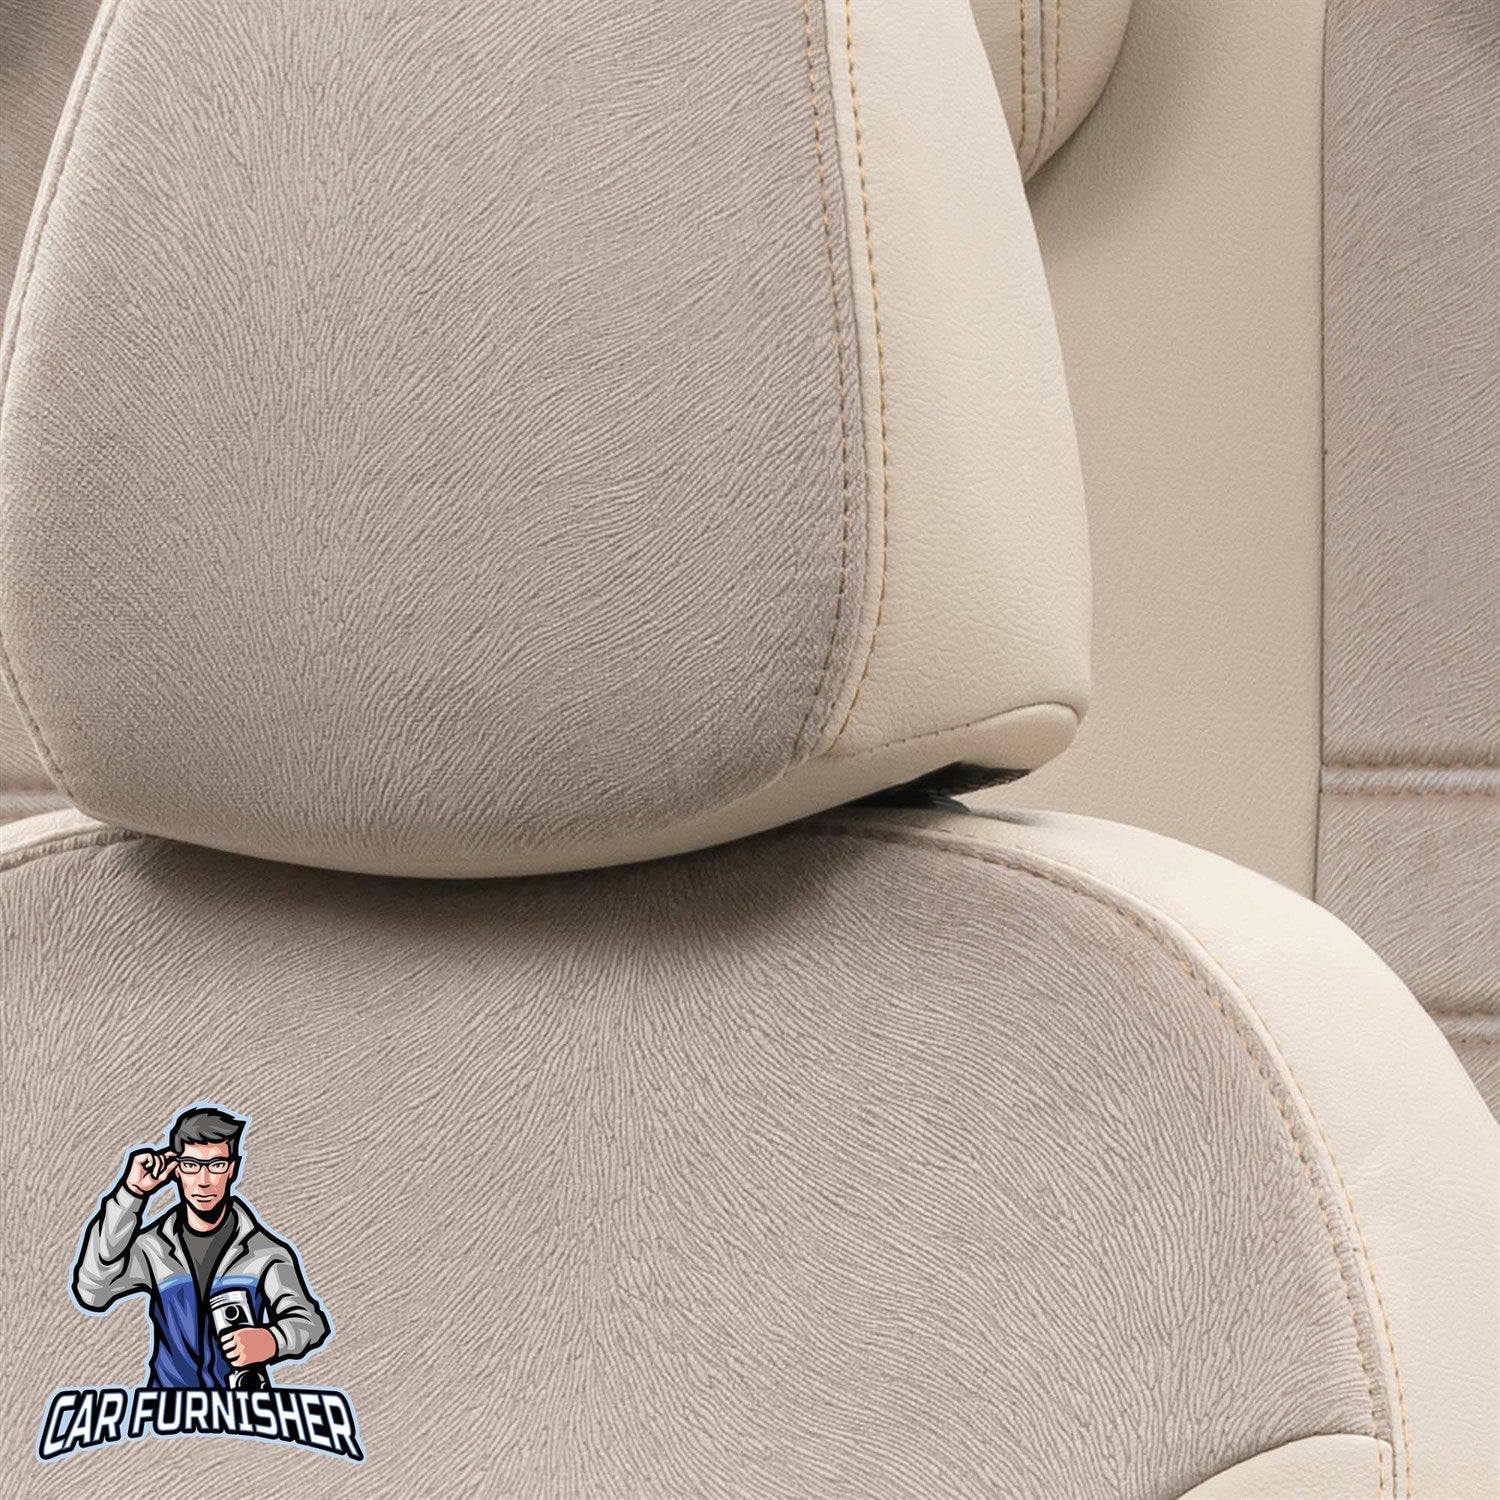 Rover 75 Car Seat Covers 1999-2001 London Design Beige Full Set (5 Seats + Handrest) Leather & Fabric